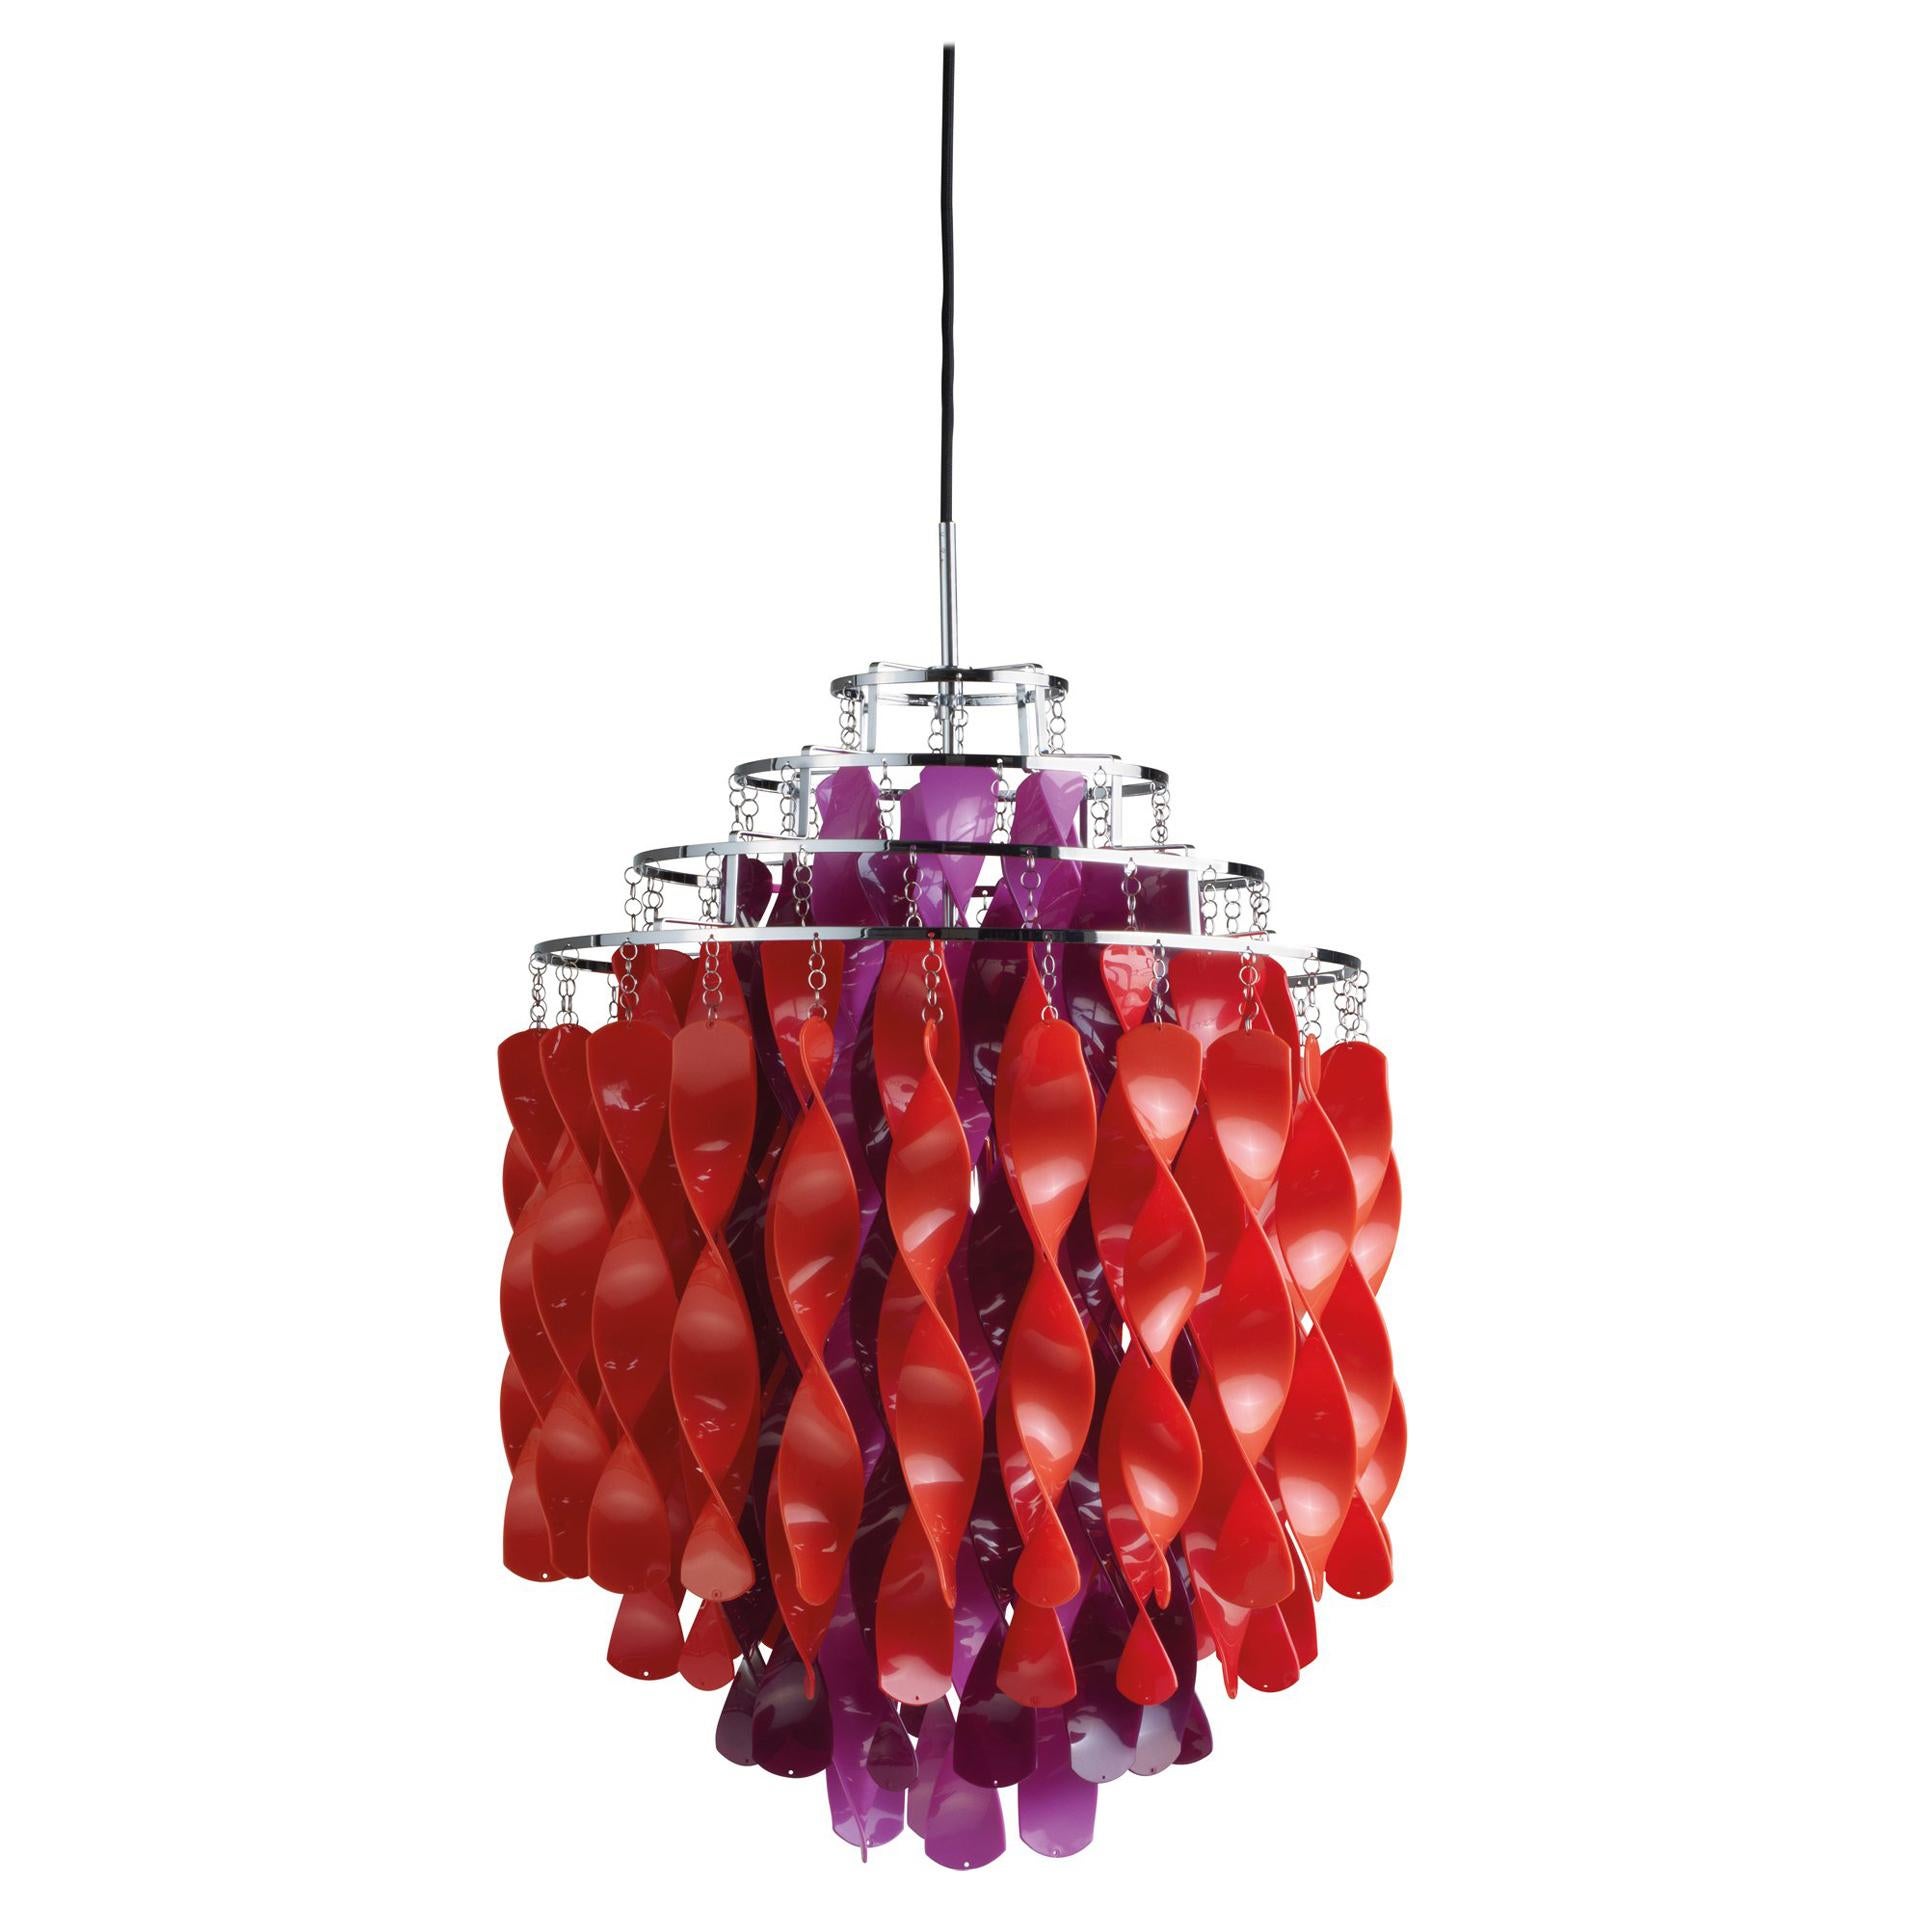 Spiral SP01 Pendant Light in Purple and Red by Verner Panton